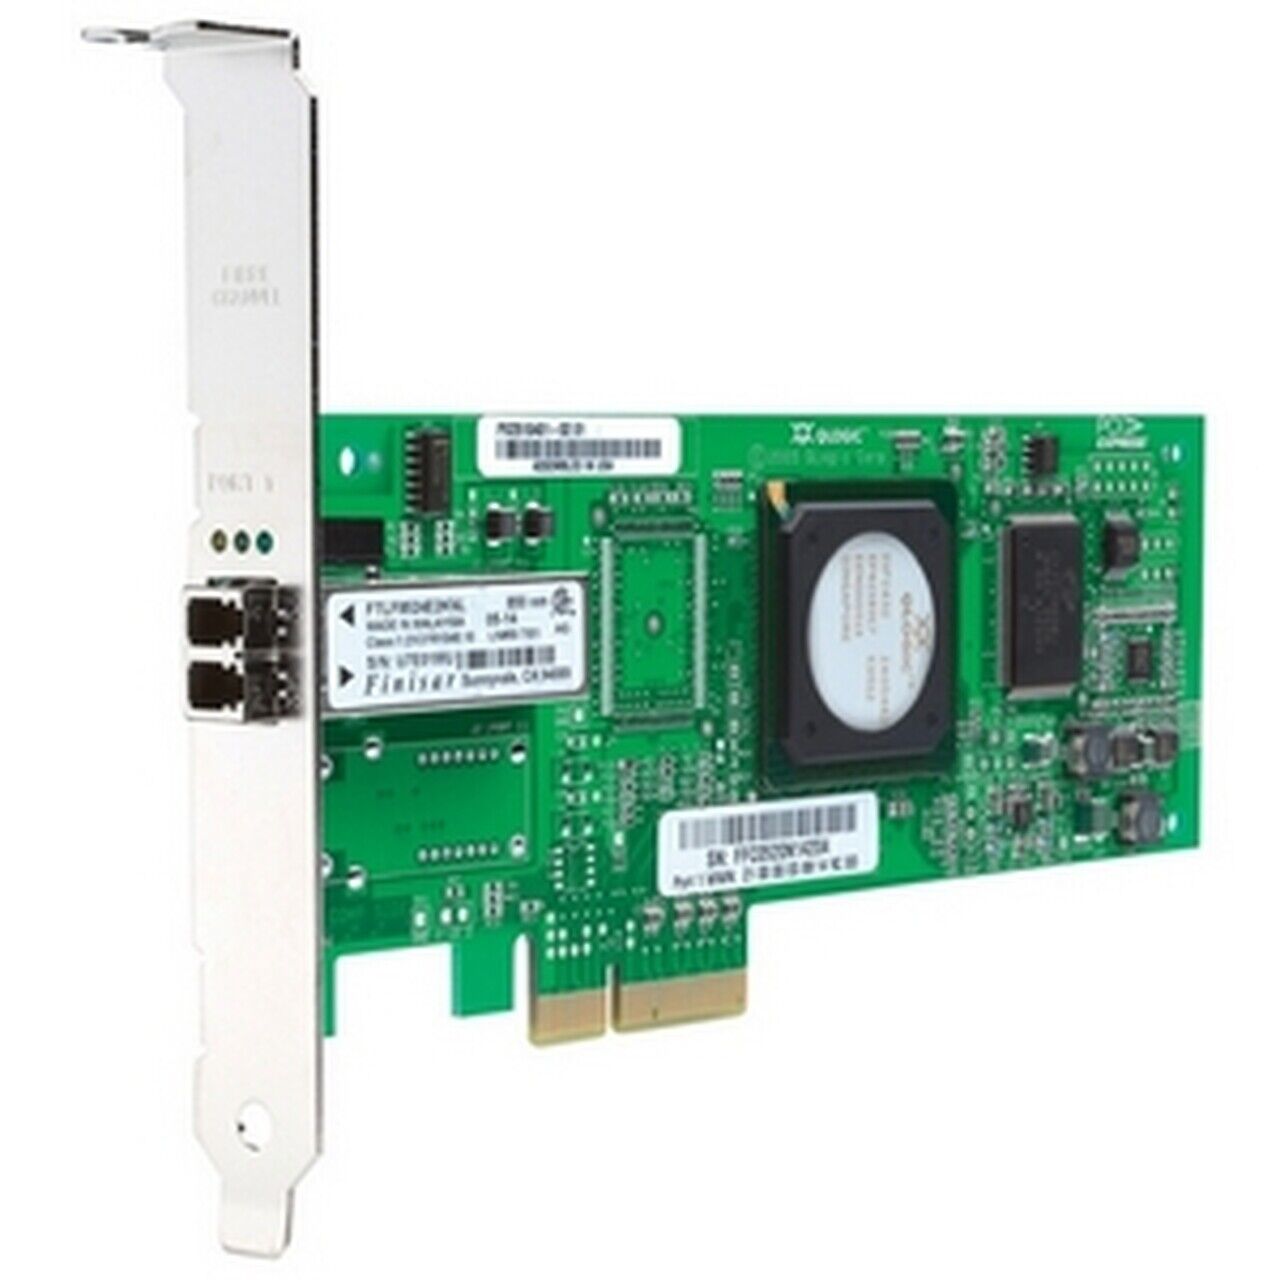 AD167A I HP FC2143 PCI-X-to-Fibre Channel Host Bus Adapter